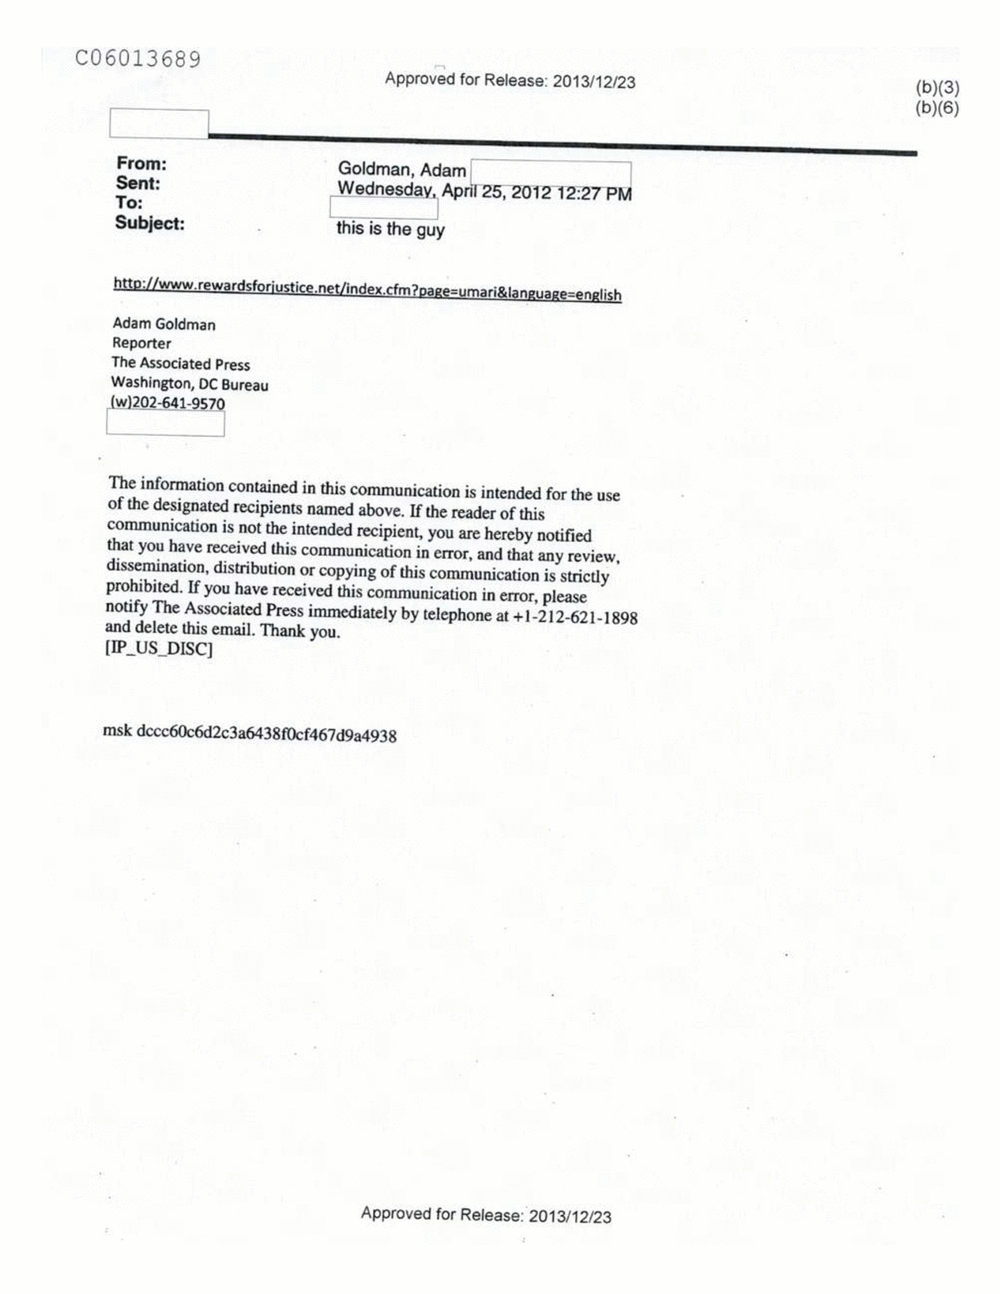 Page 547 from Email Correspondence Between Reporters and CIA Flacks